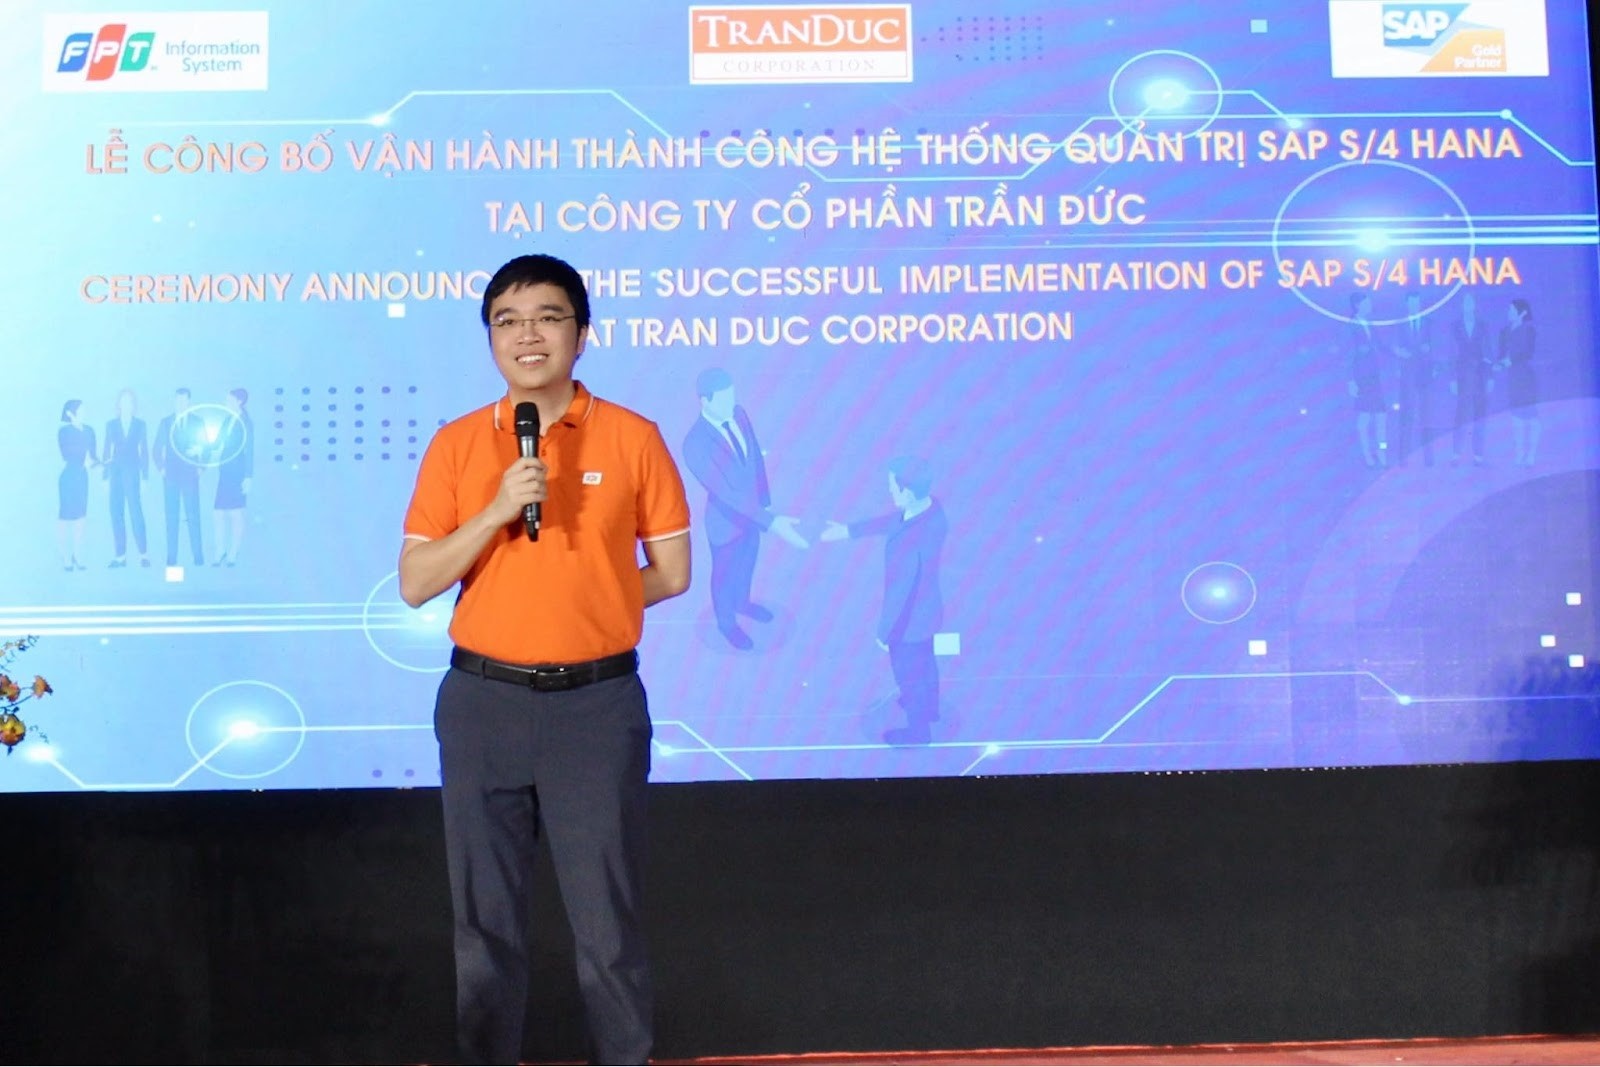 FPT IS and Tran Duc implement 'Rise with SAP' solution